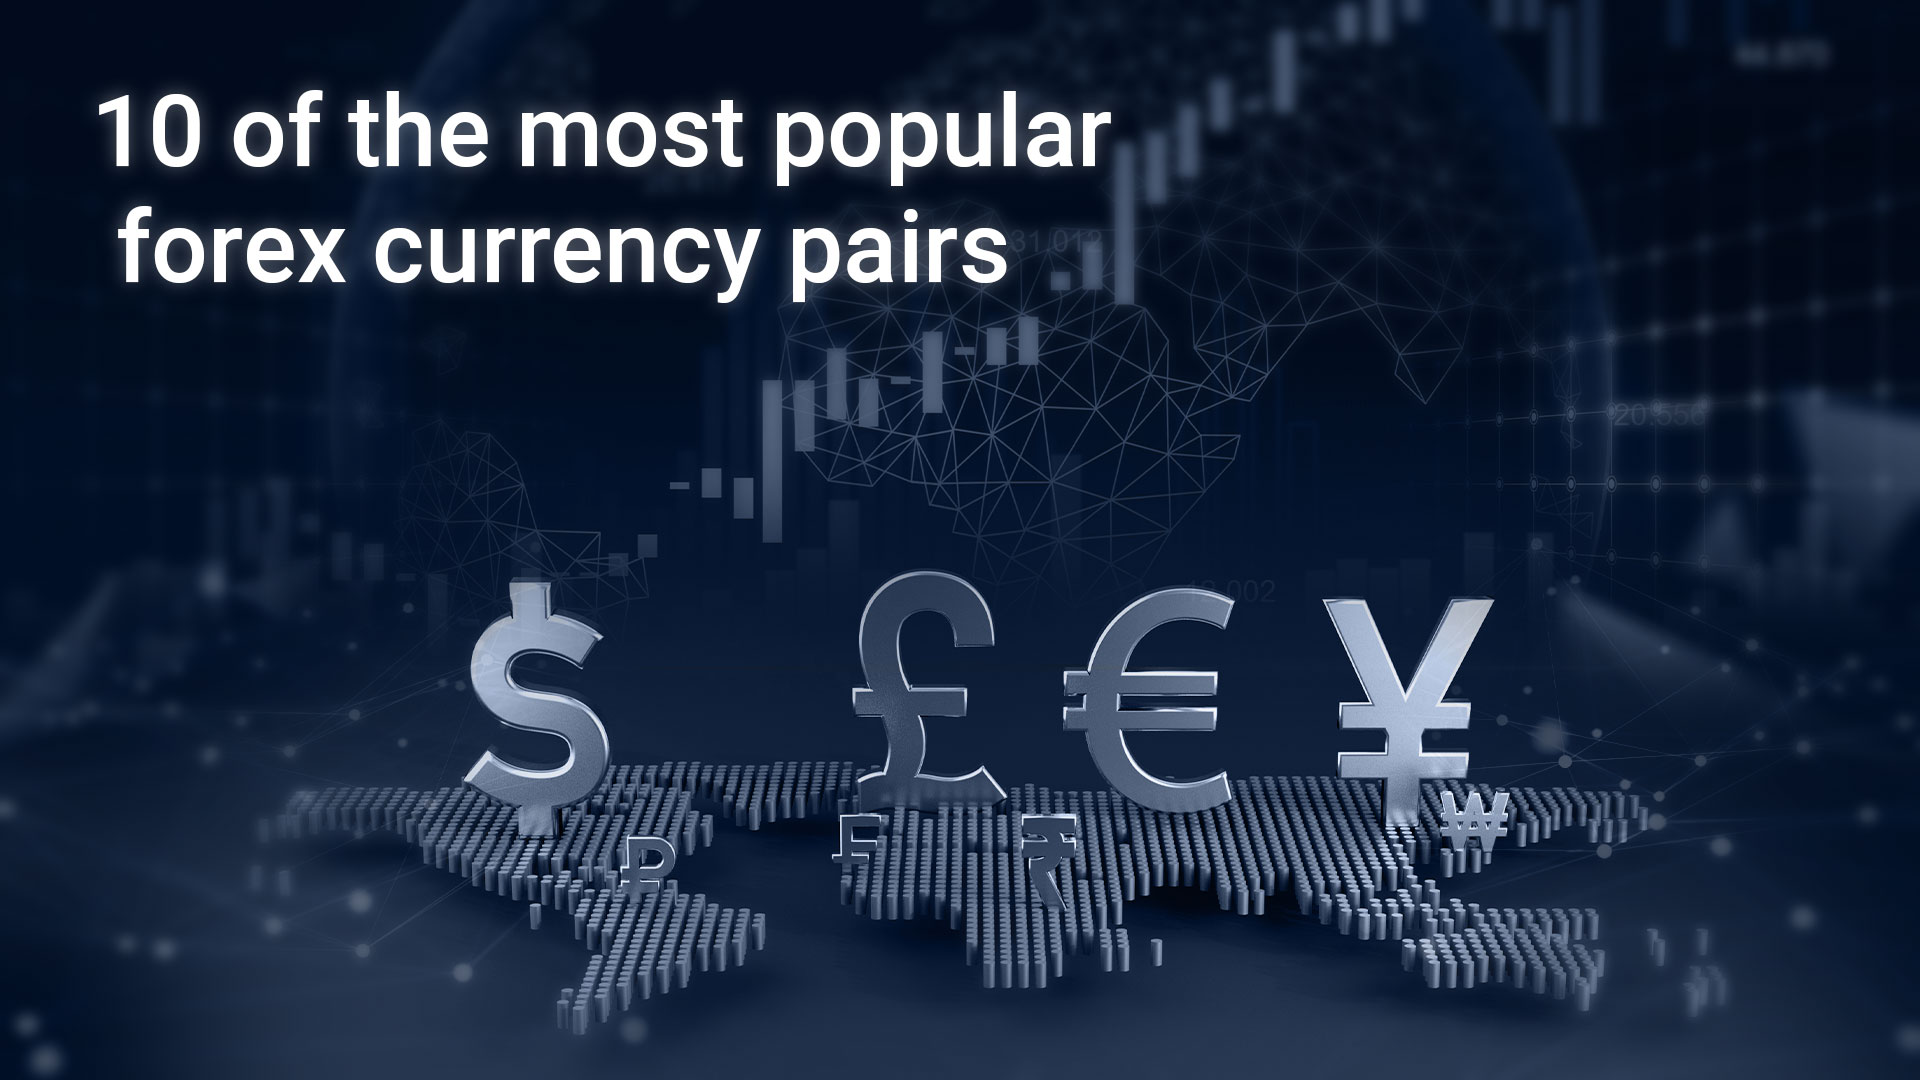 10 of the most popular forex currency pairs